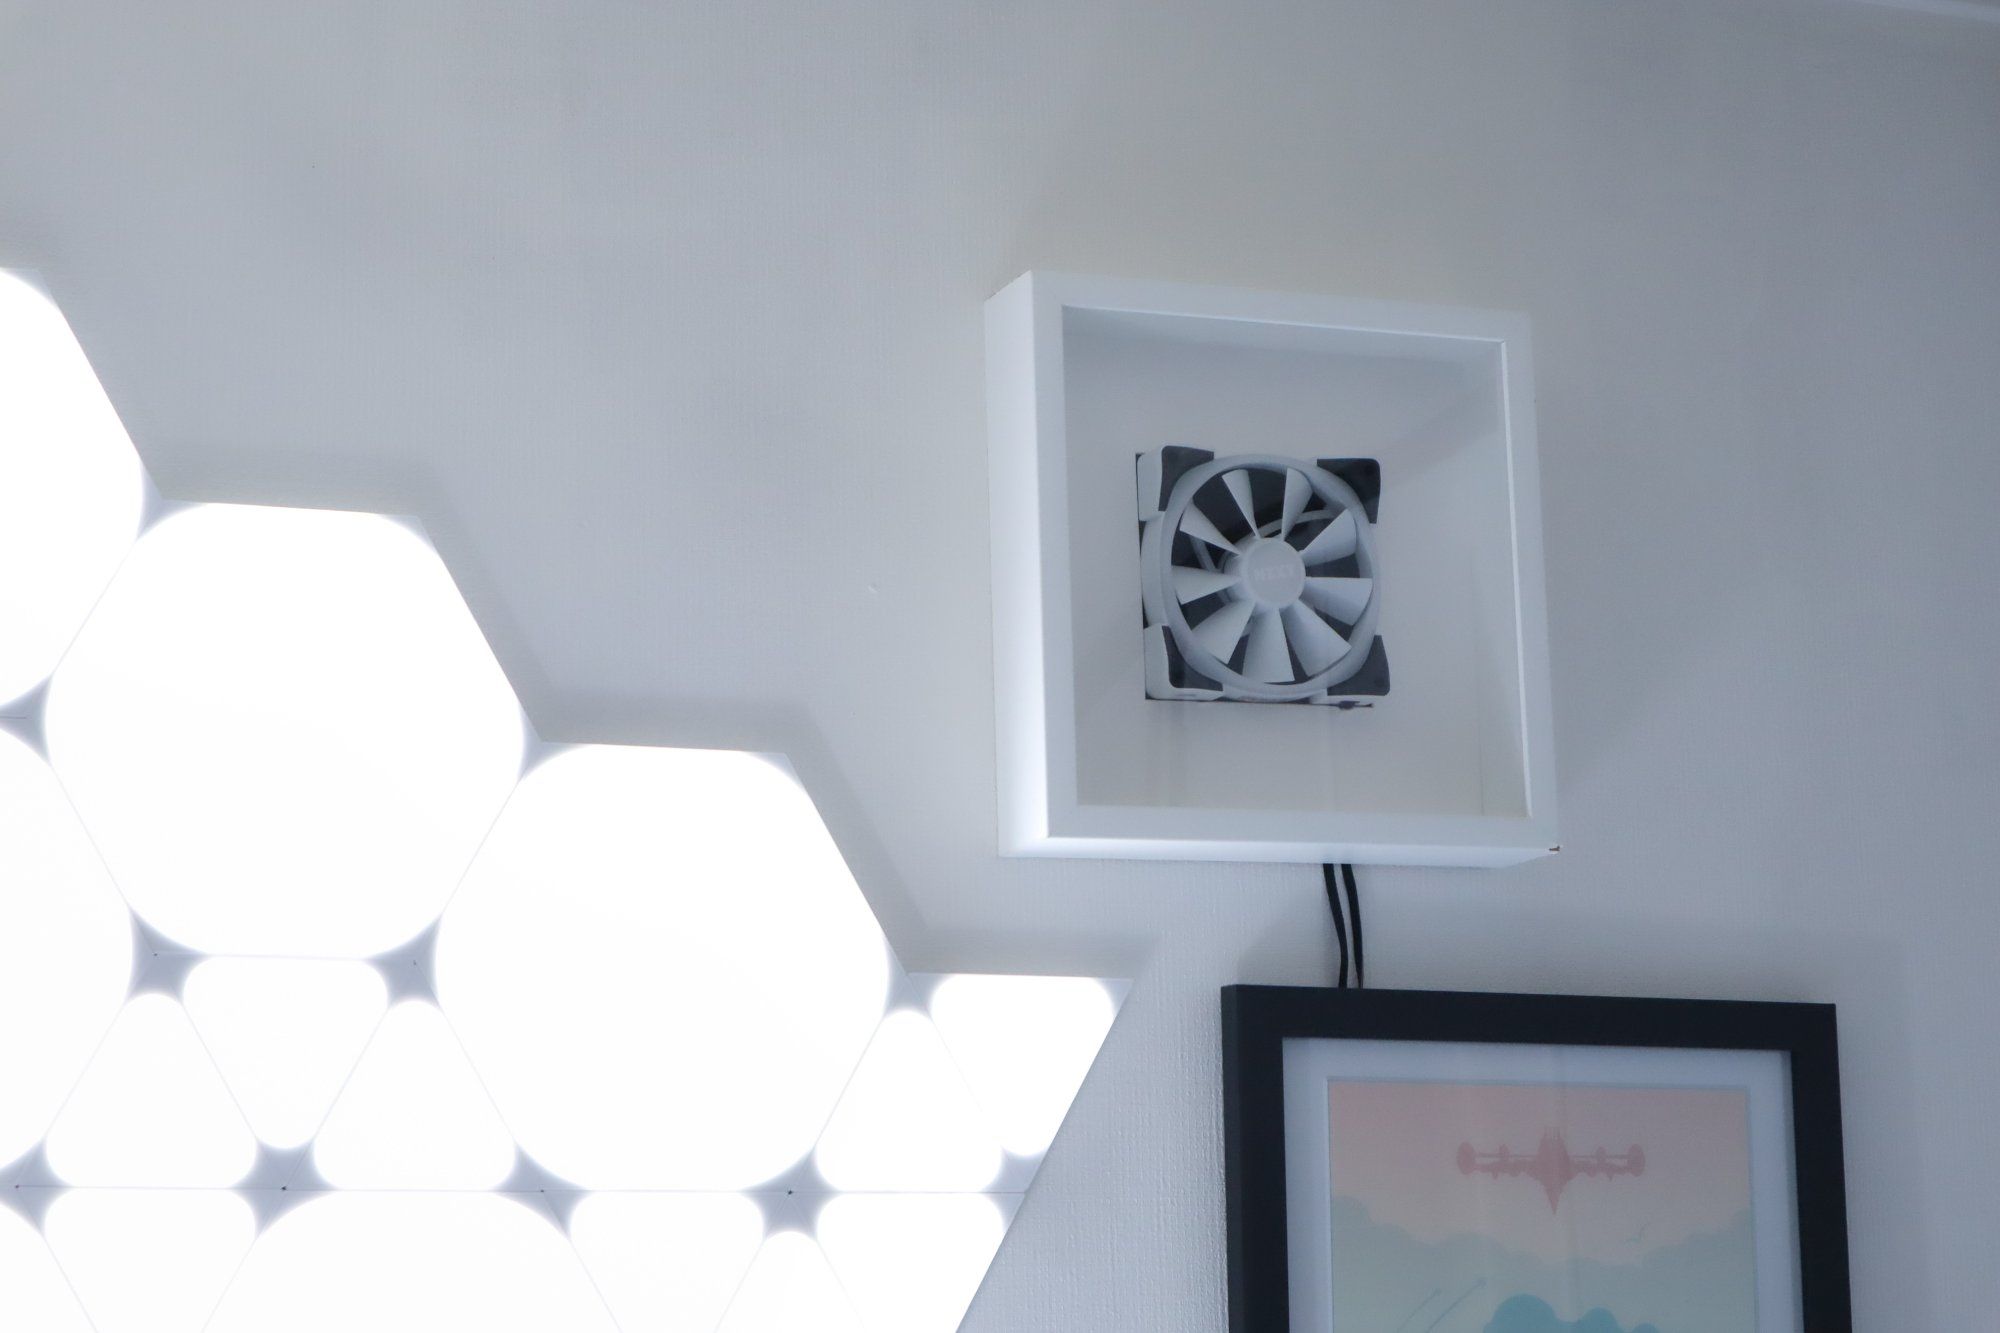 A minimalistic wall-mounted frame featuring a white PC fan, set against a modern backdrop of hexagonal light panels and a framed artwork